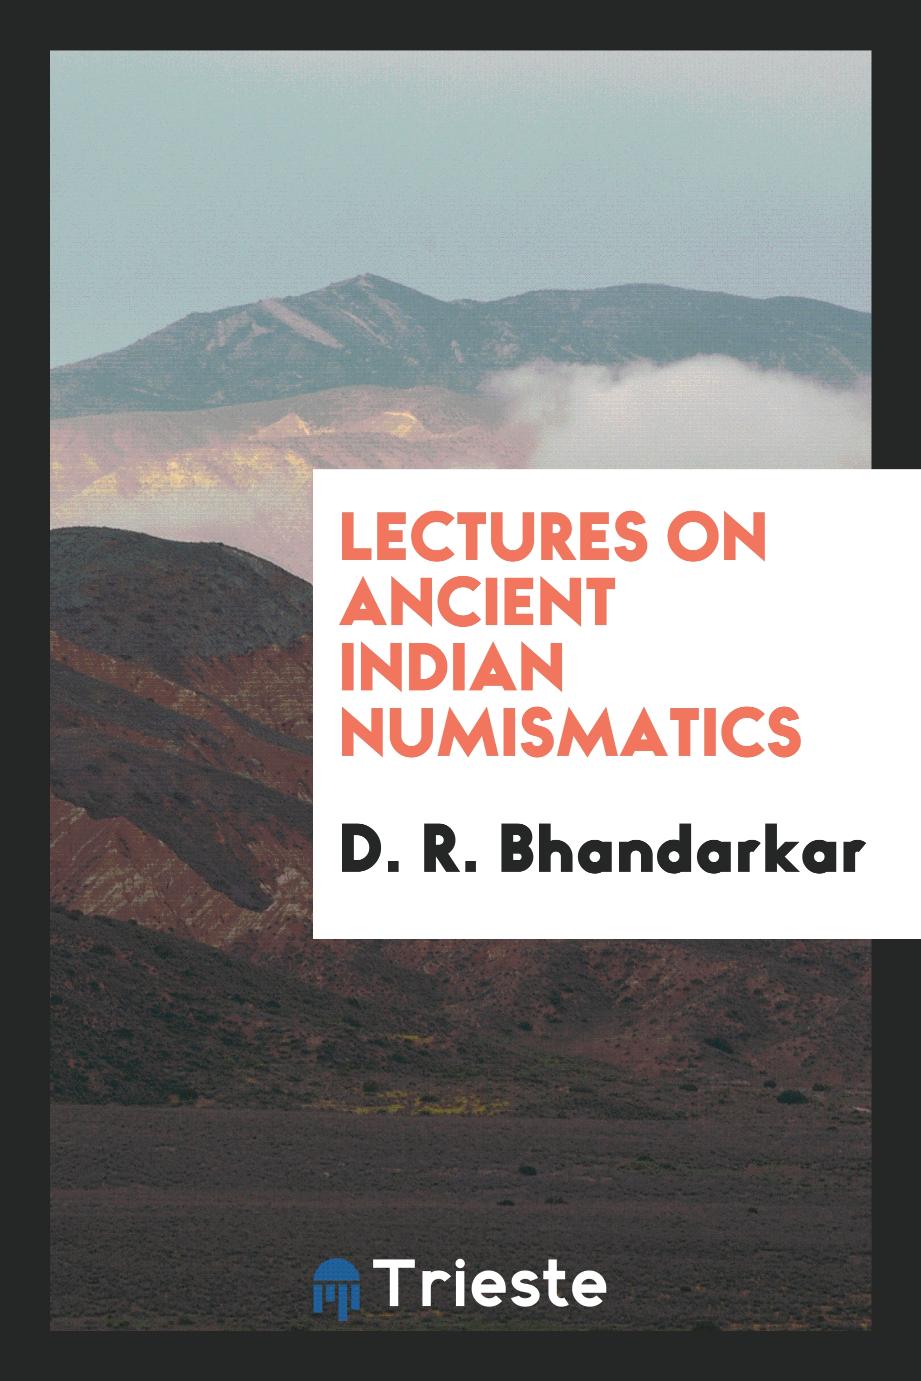 Lectures on ancient Indian numismatics